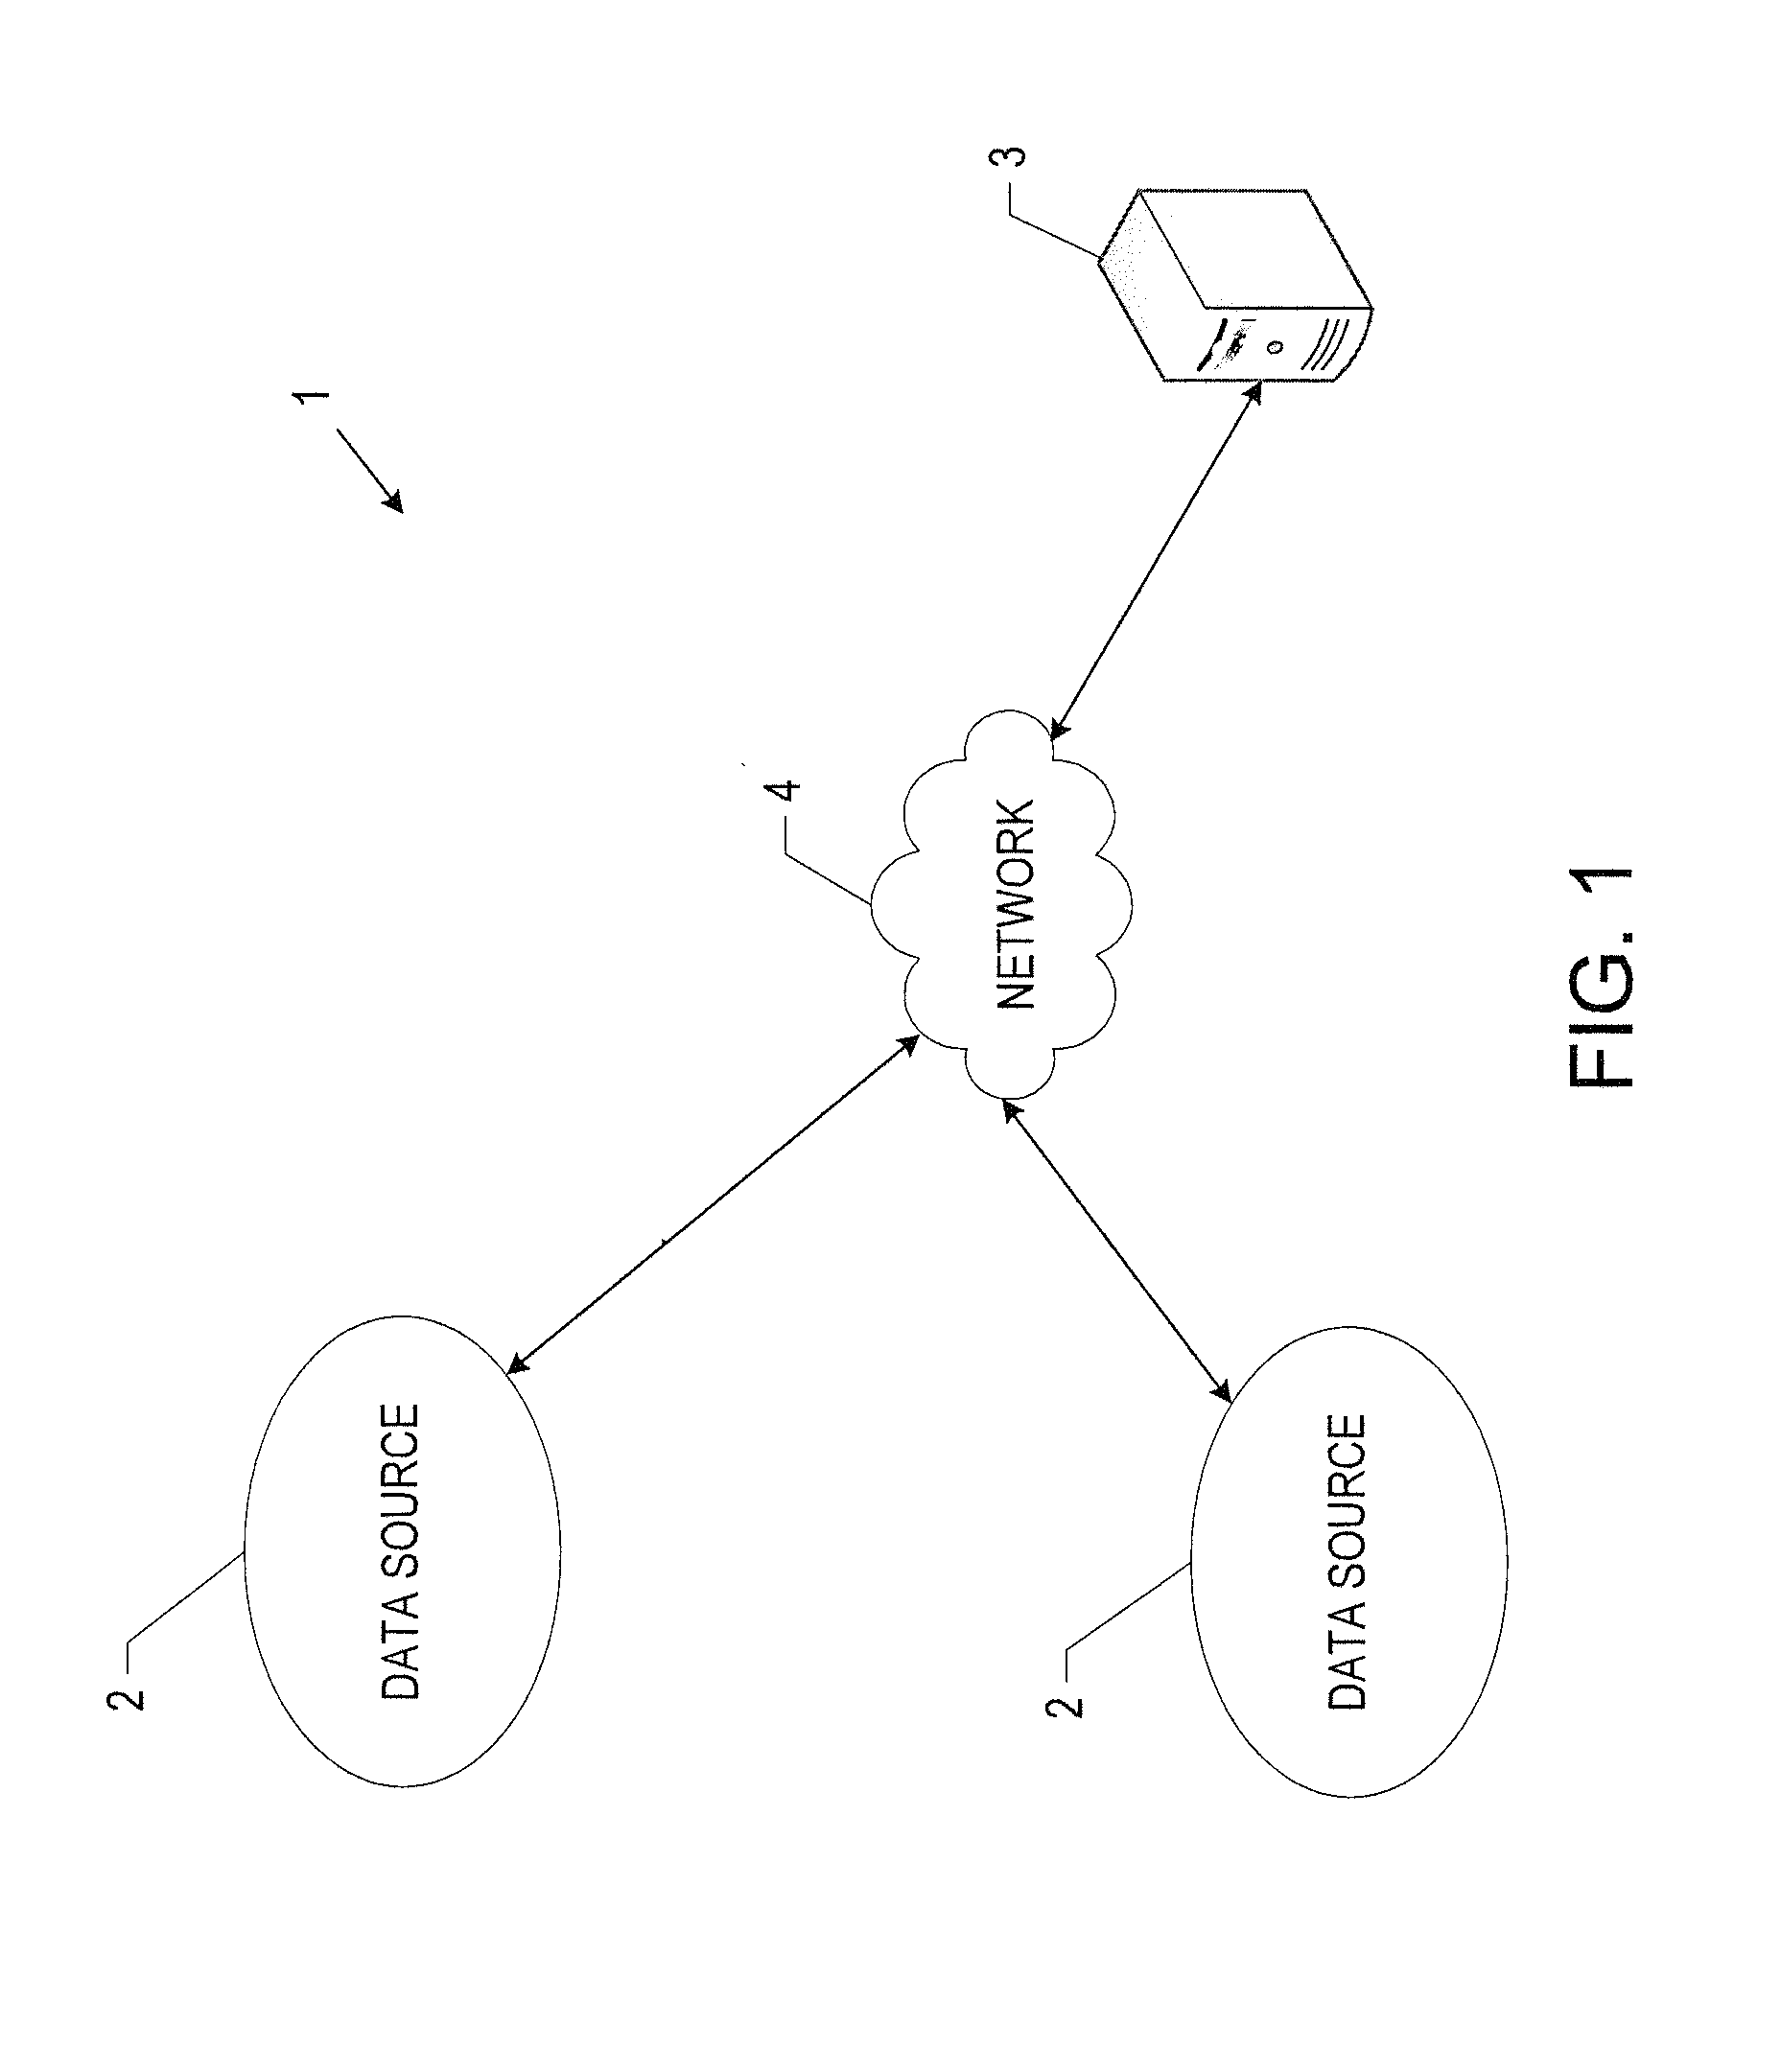 Systems and methods for assessing operational data for a vehicle fleet